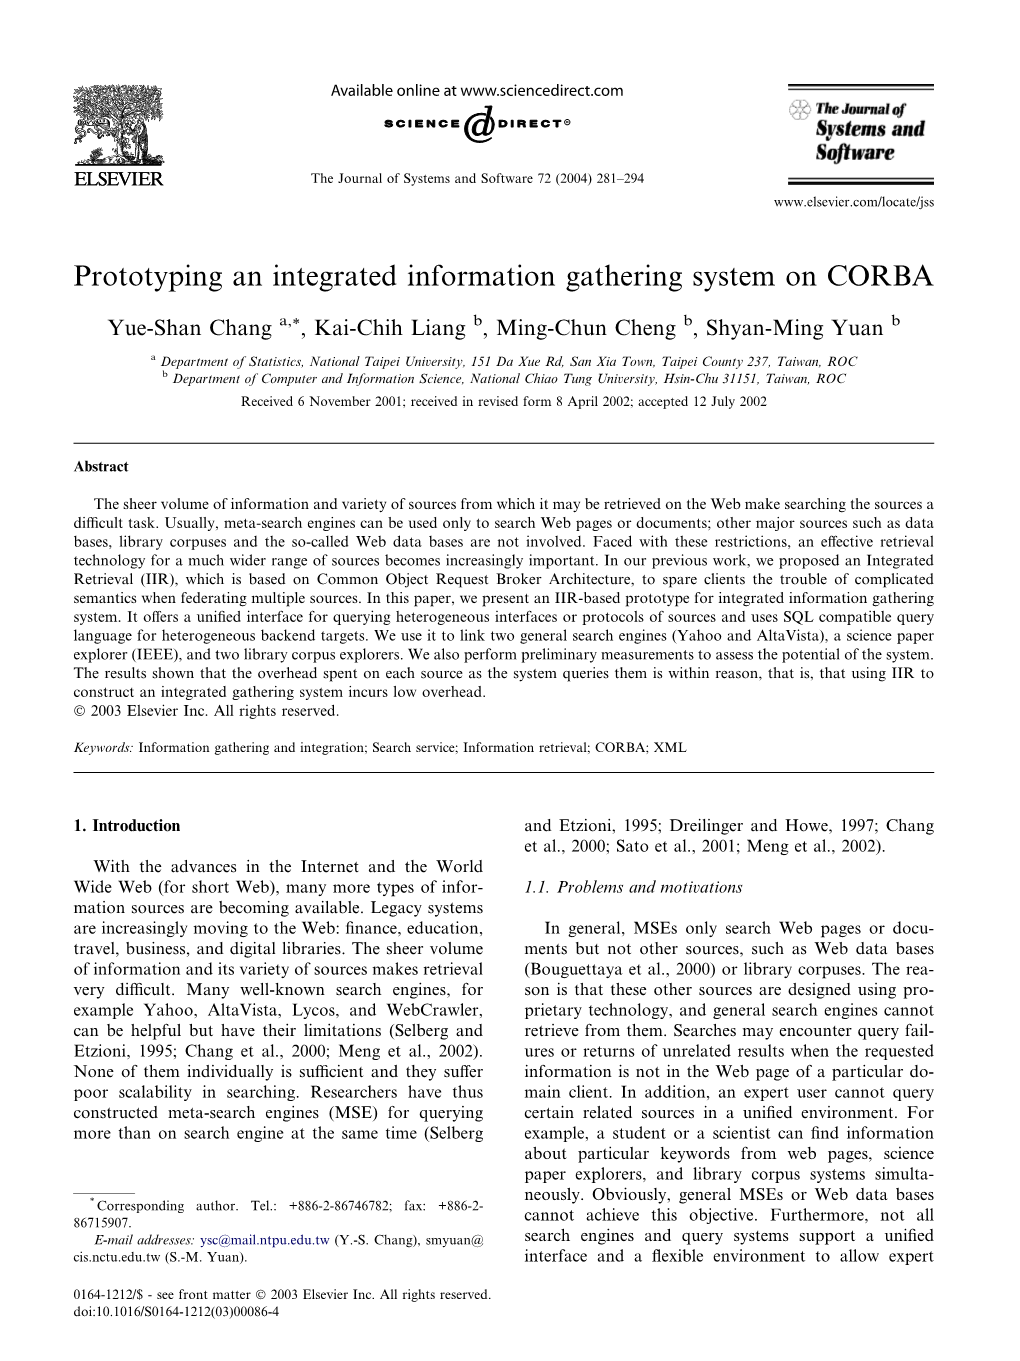 Prototyping an Integrated Information Gathering System on CORBA